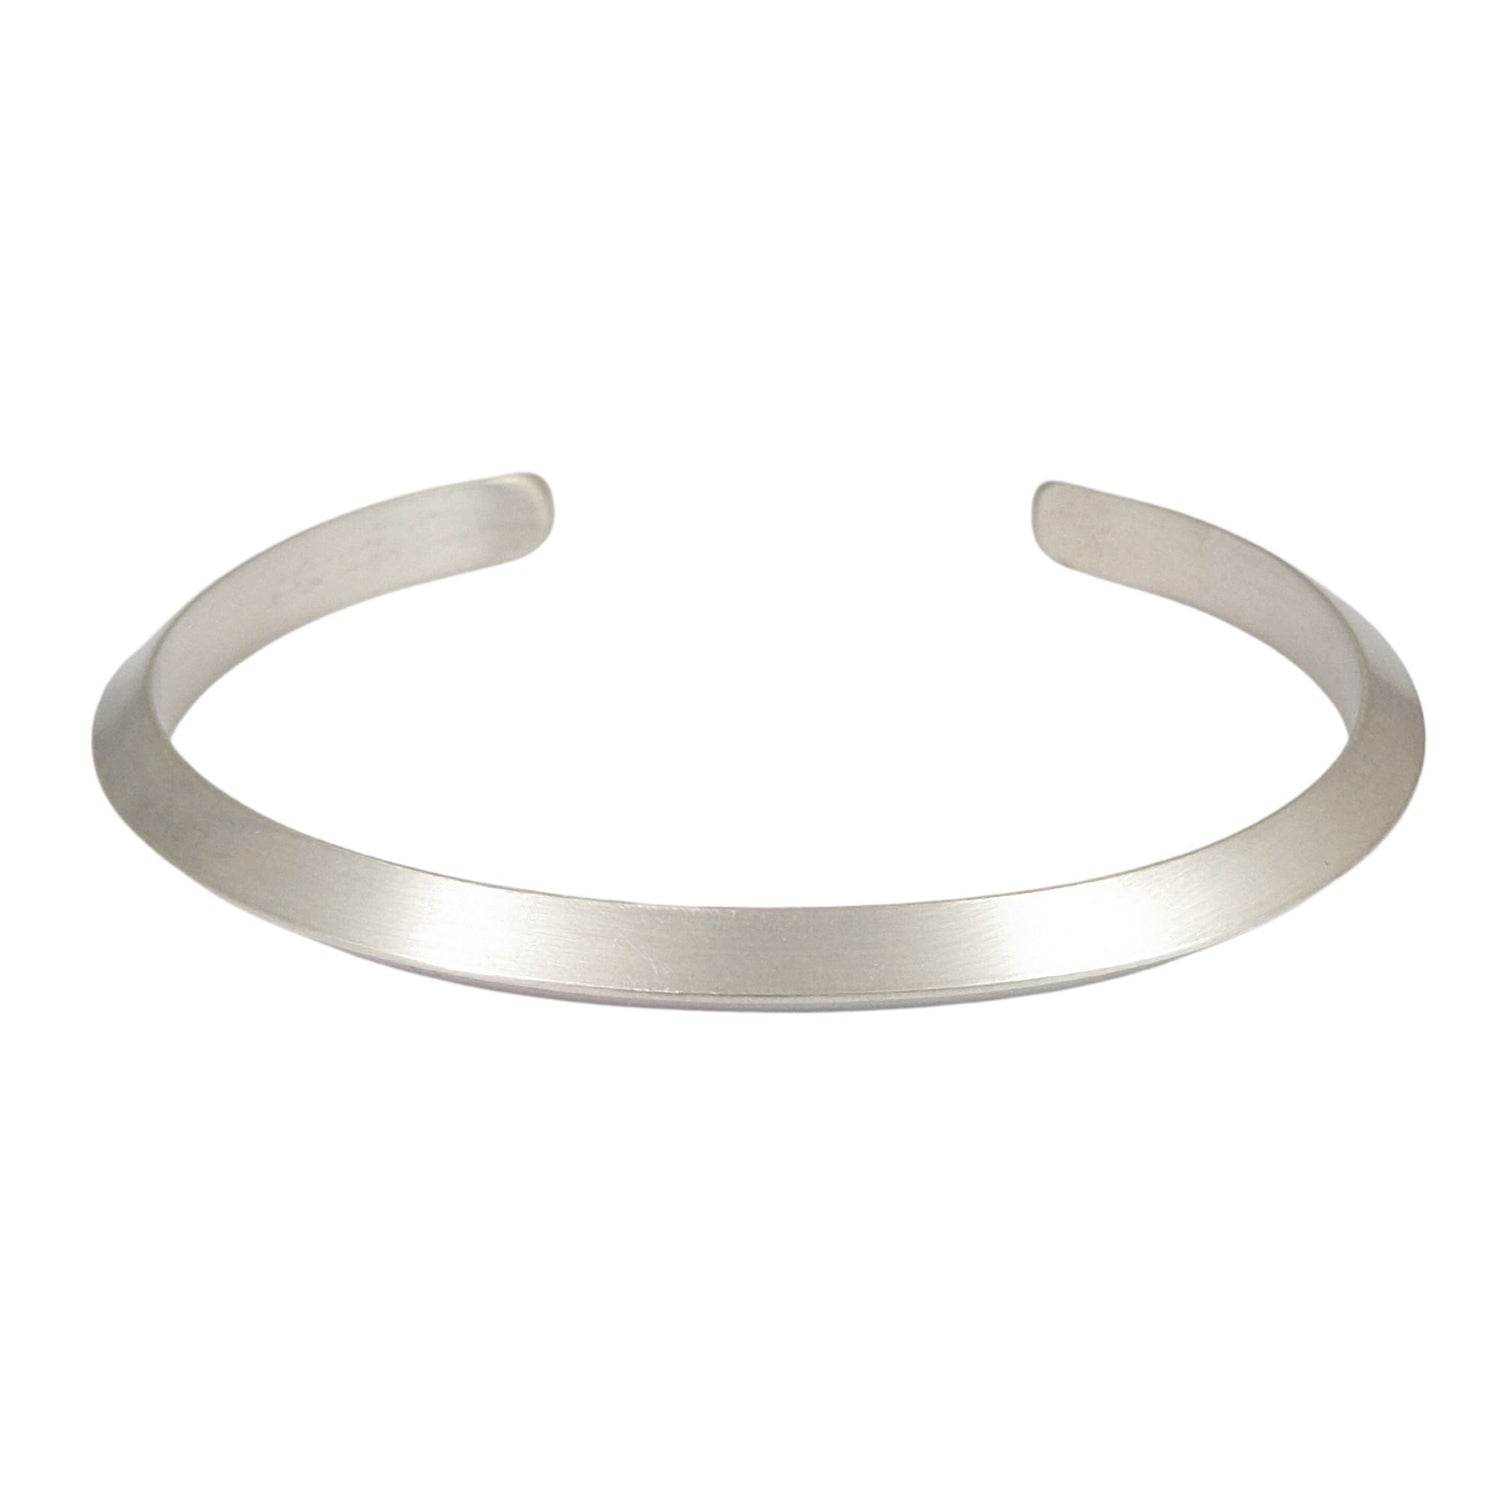 Mens sterling silver cuff bracelet made with heavy triangle shaped wire